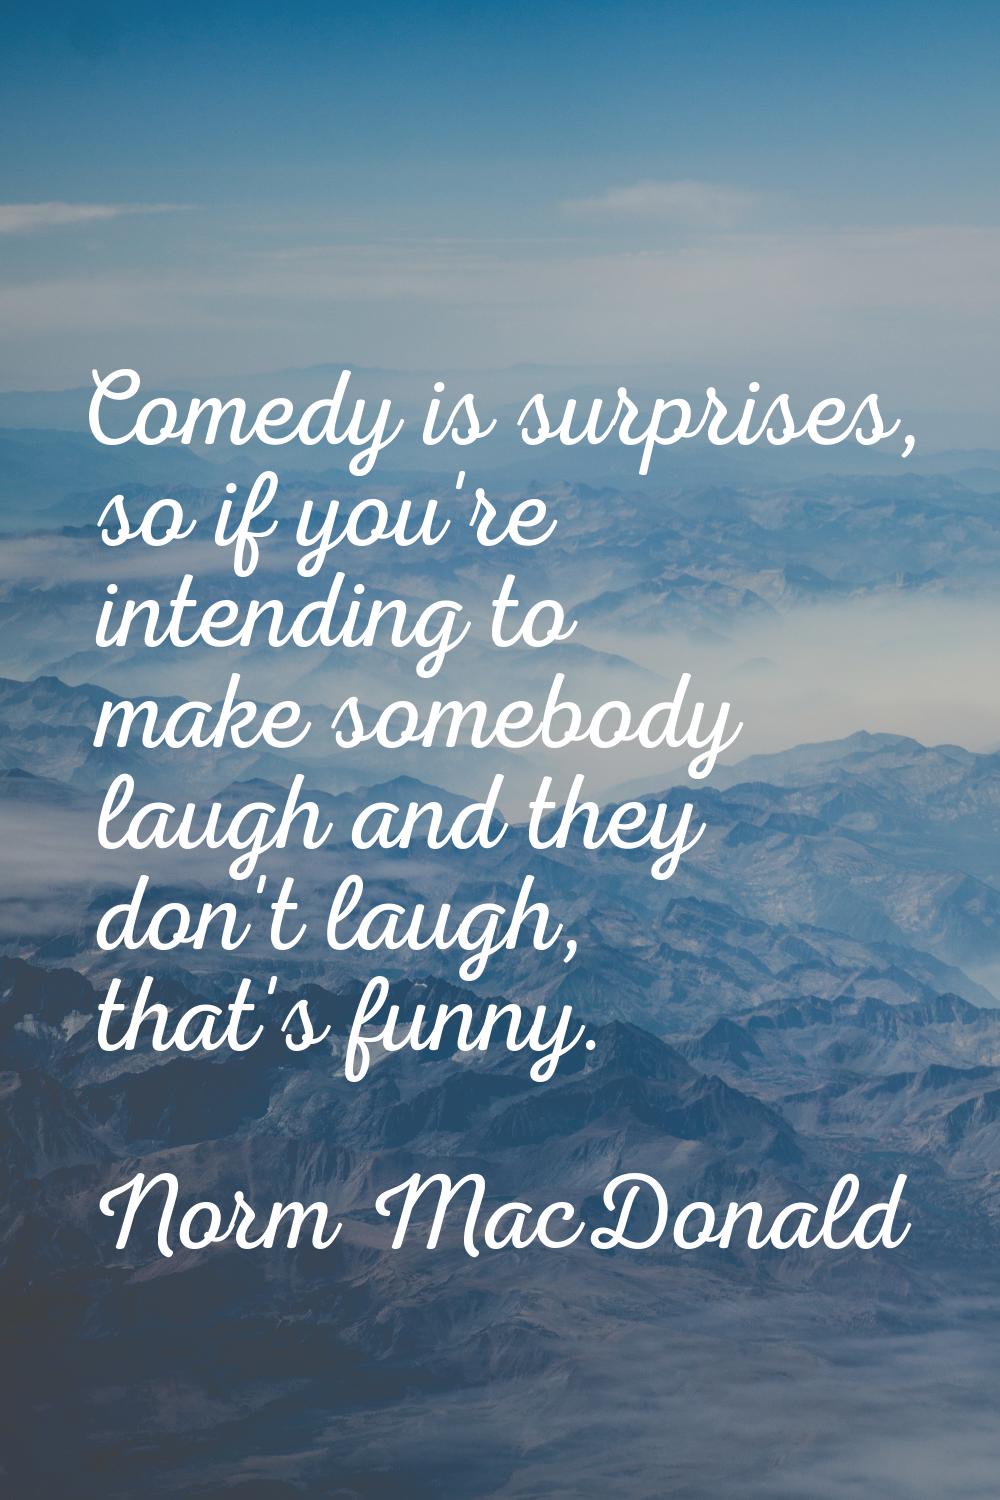 Comedy is surprises, so if you're intending to make somebody laugh and they don't laugh, that's fun